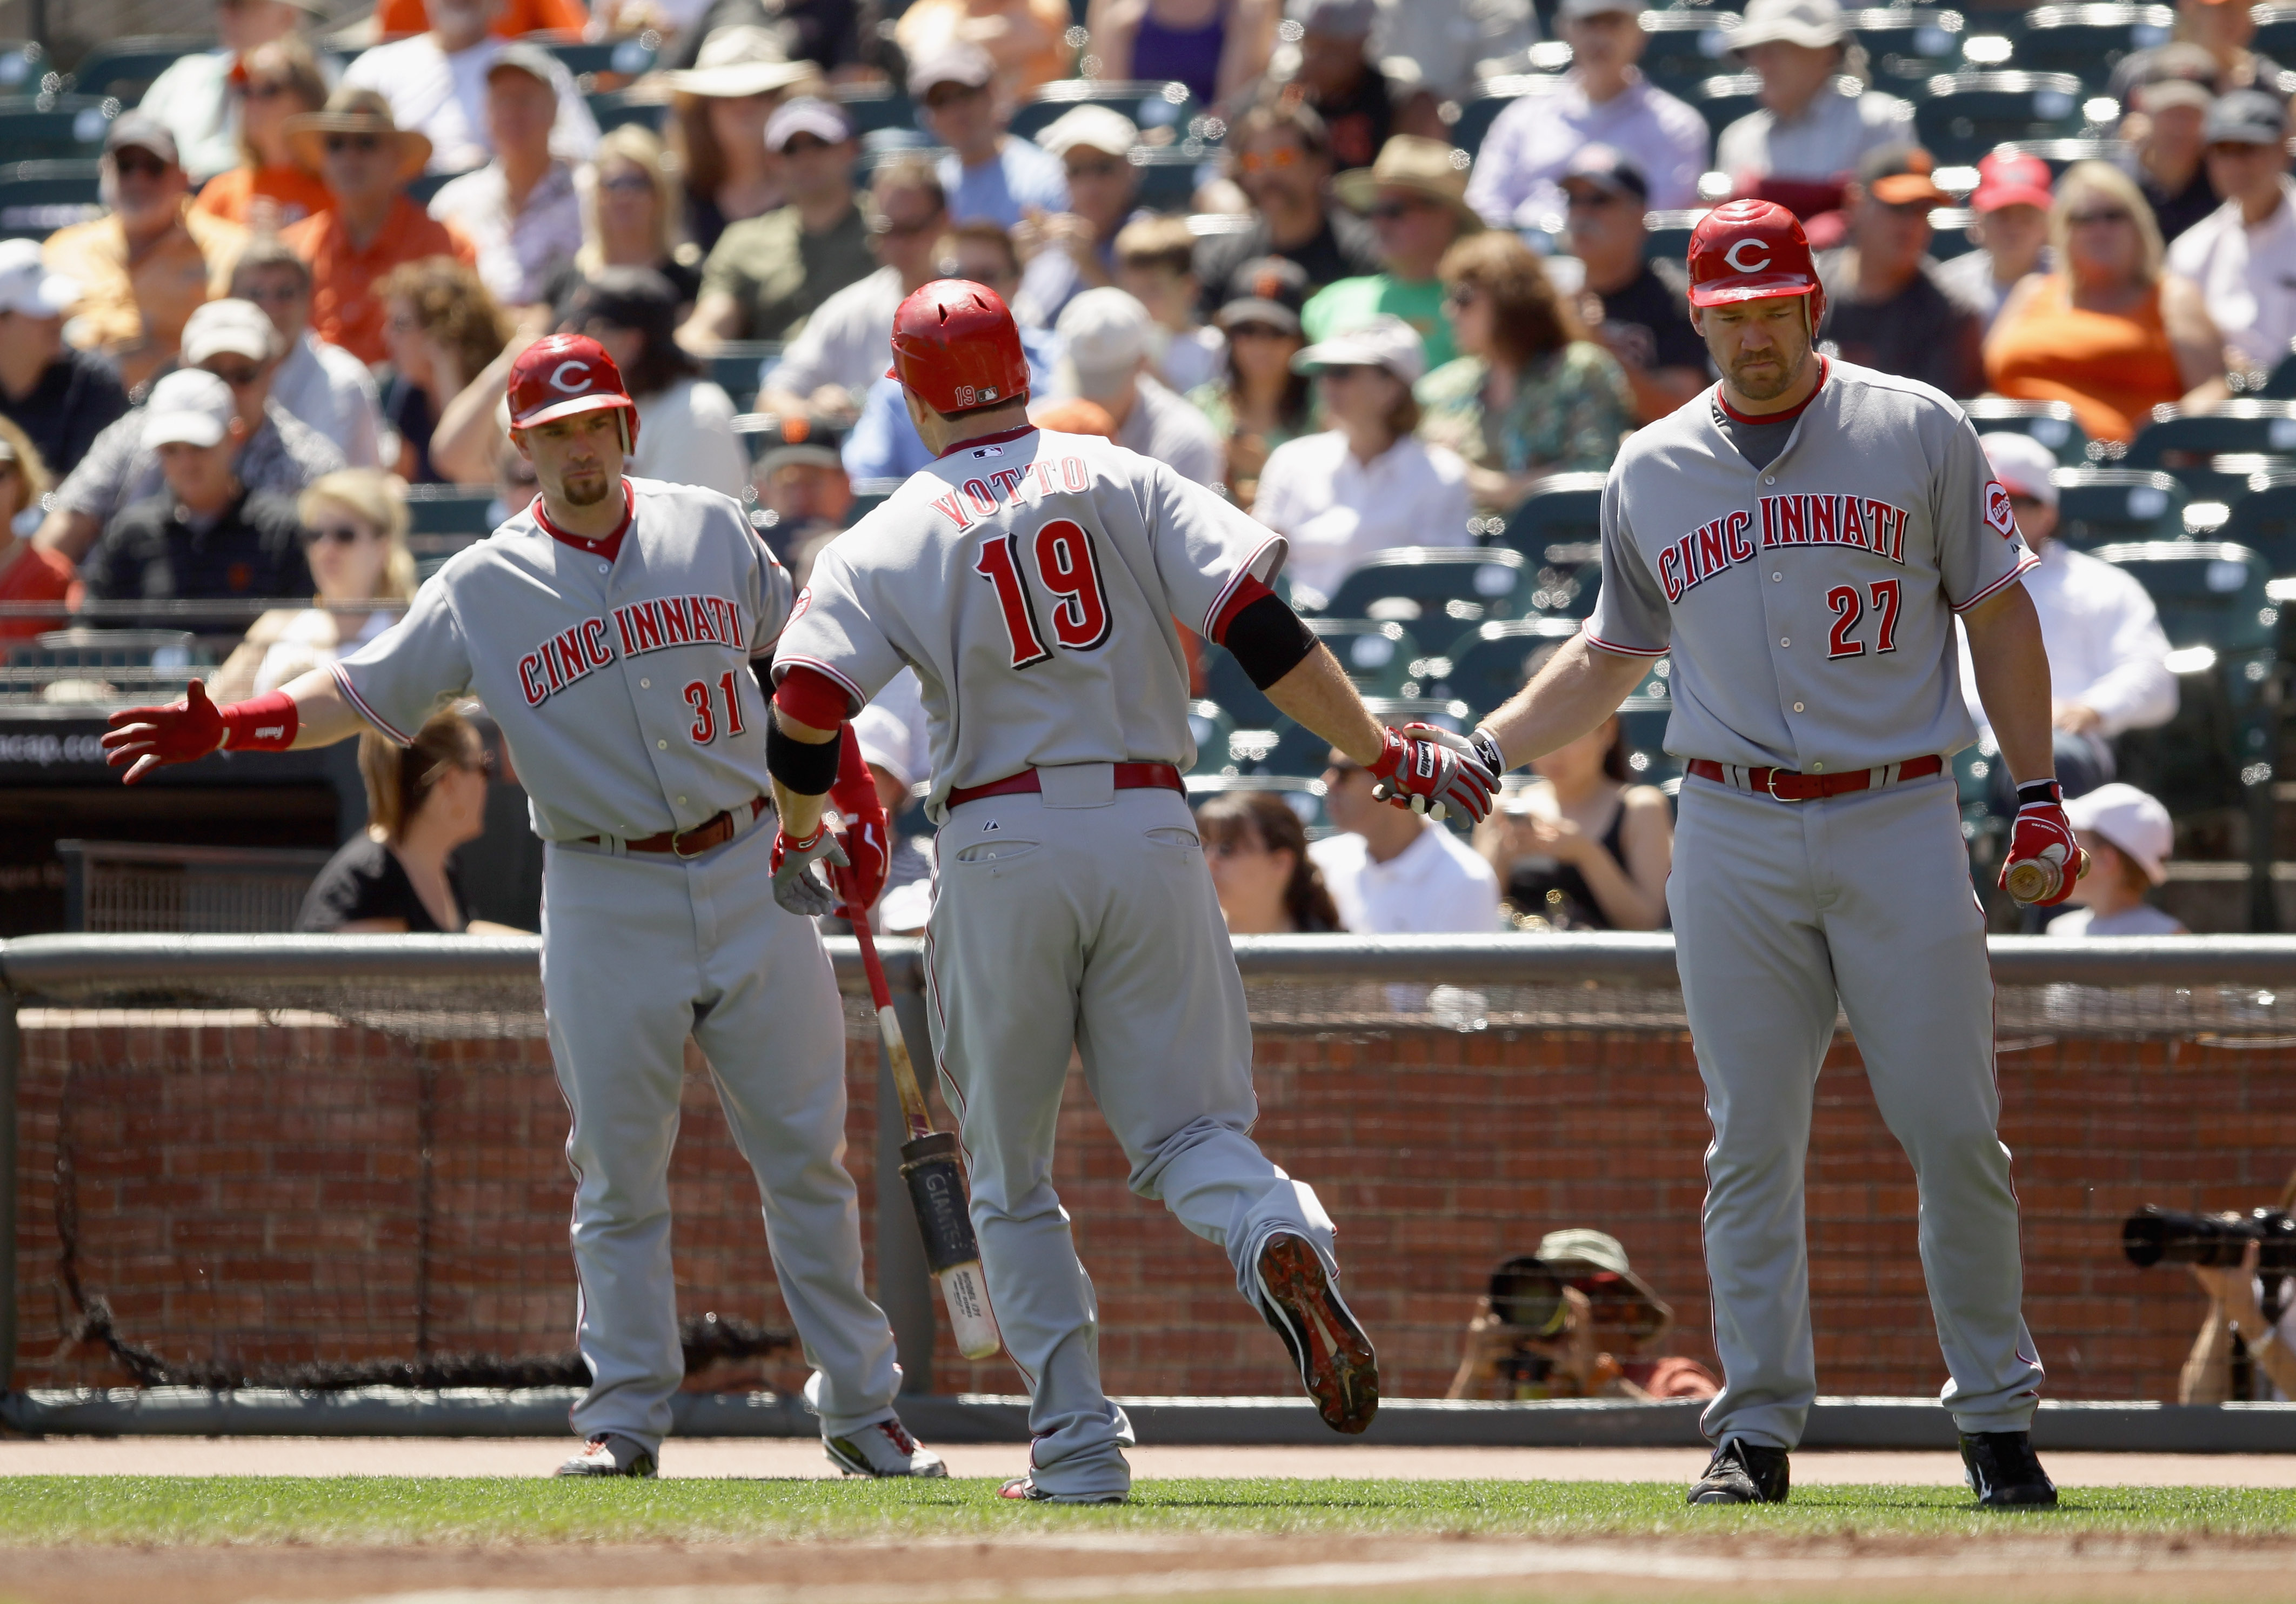 SAN FRANCISCO - AUGUST 25:  Joey Votto #19 of the Cincinnati Reds is congratulated by Scott Rolen #27 and Jonny Gomes #31 after Votto hit a home run in the first inning of their game against the San Francisco Giants at AT&T Park on August 25, 2010 in San